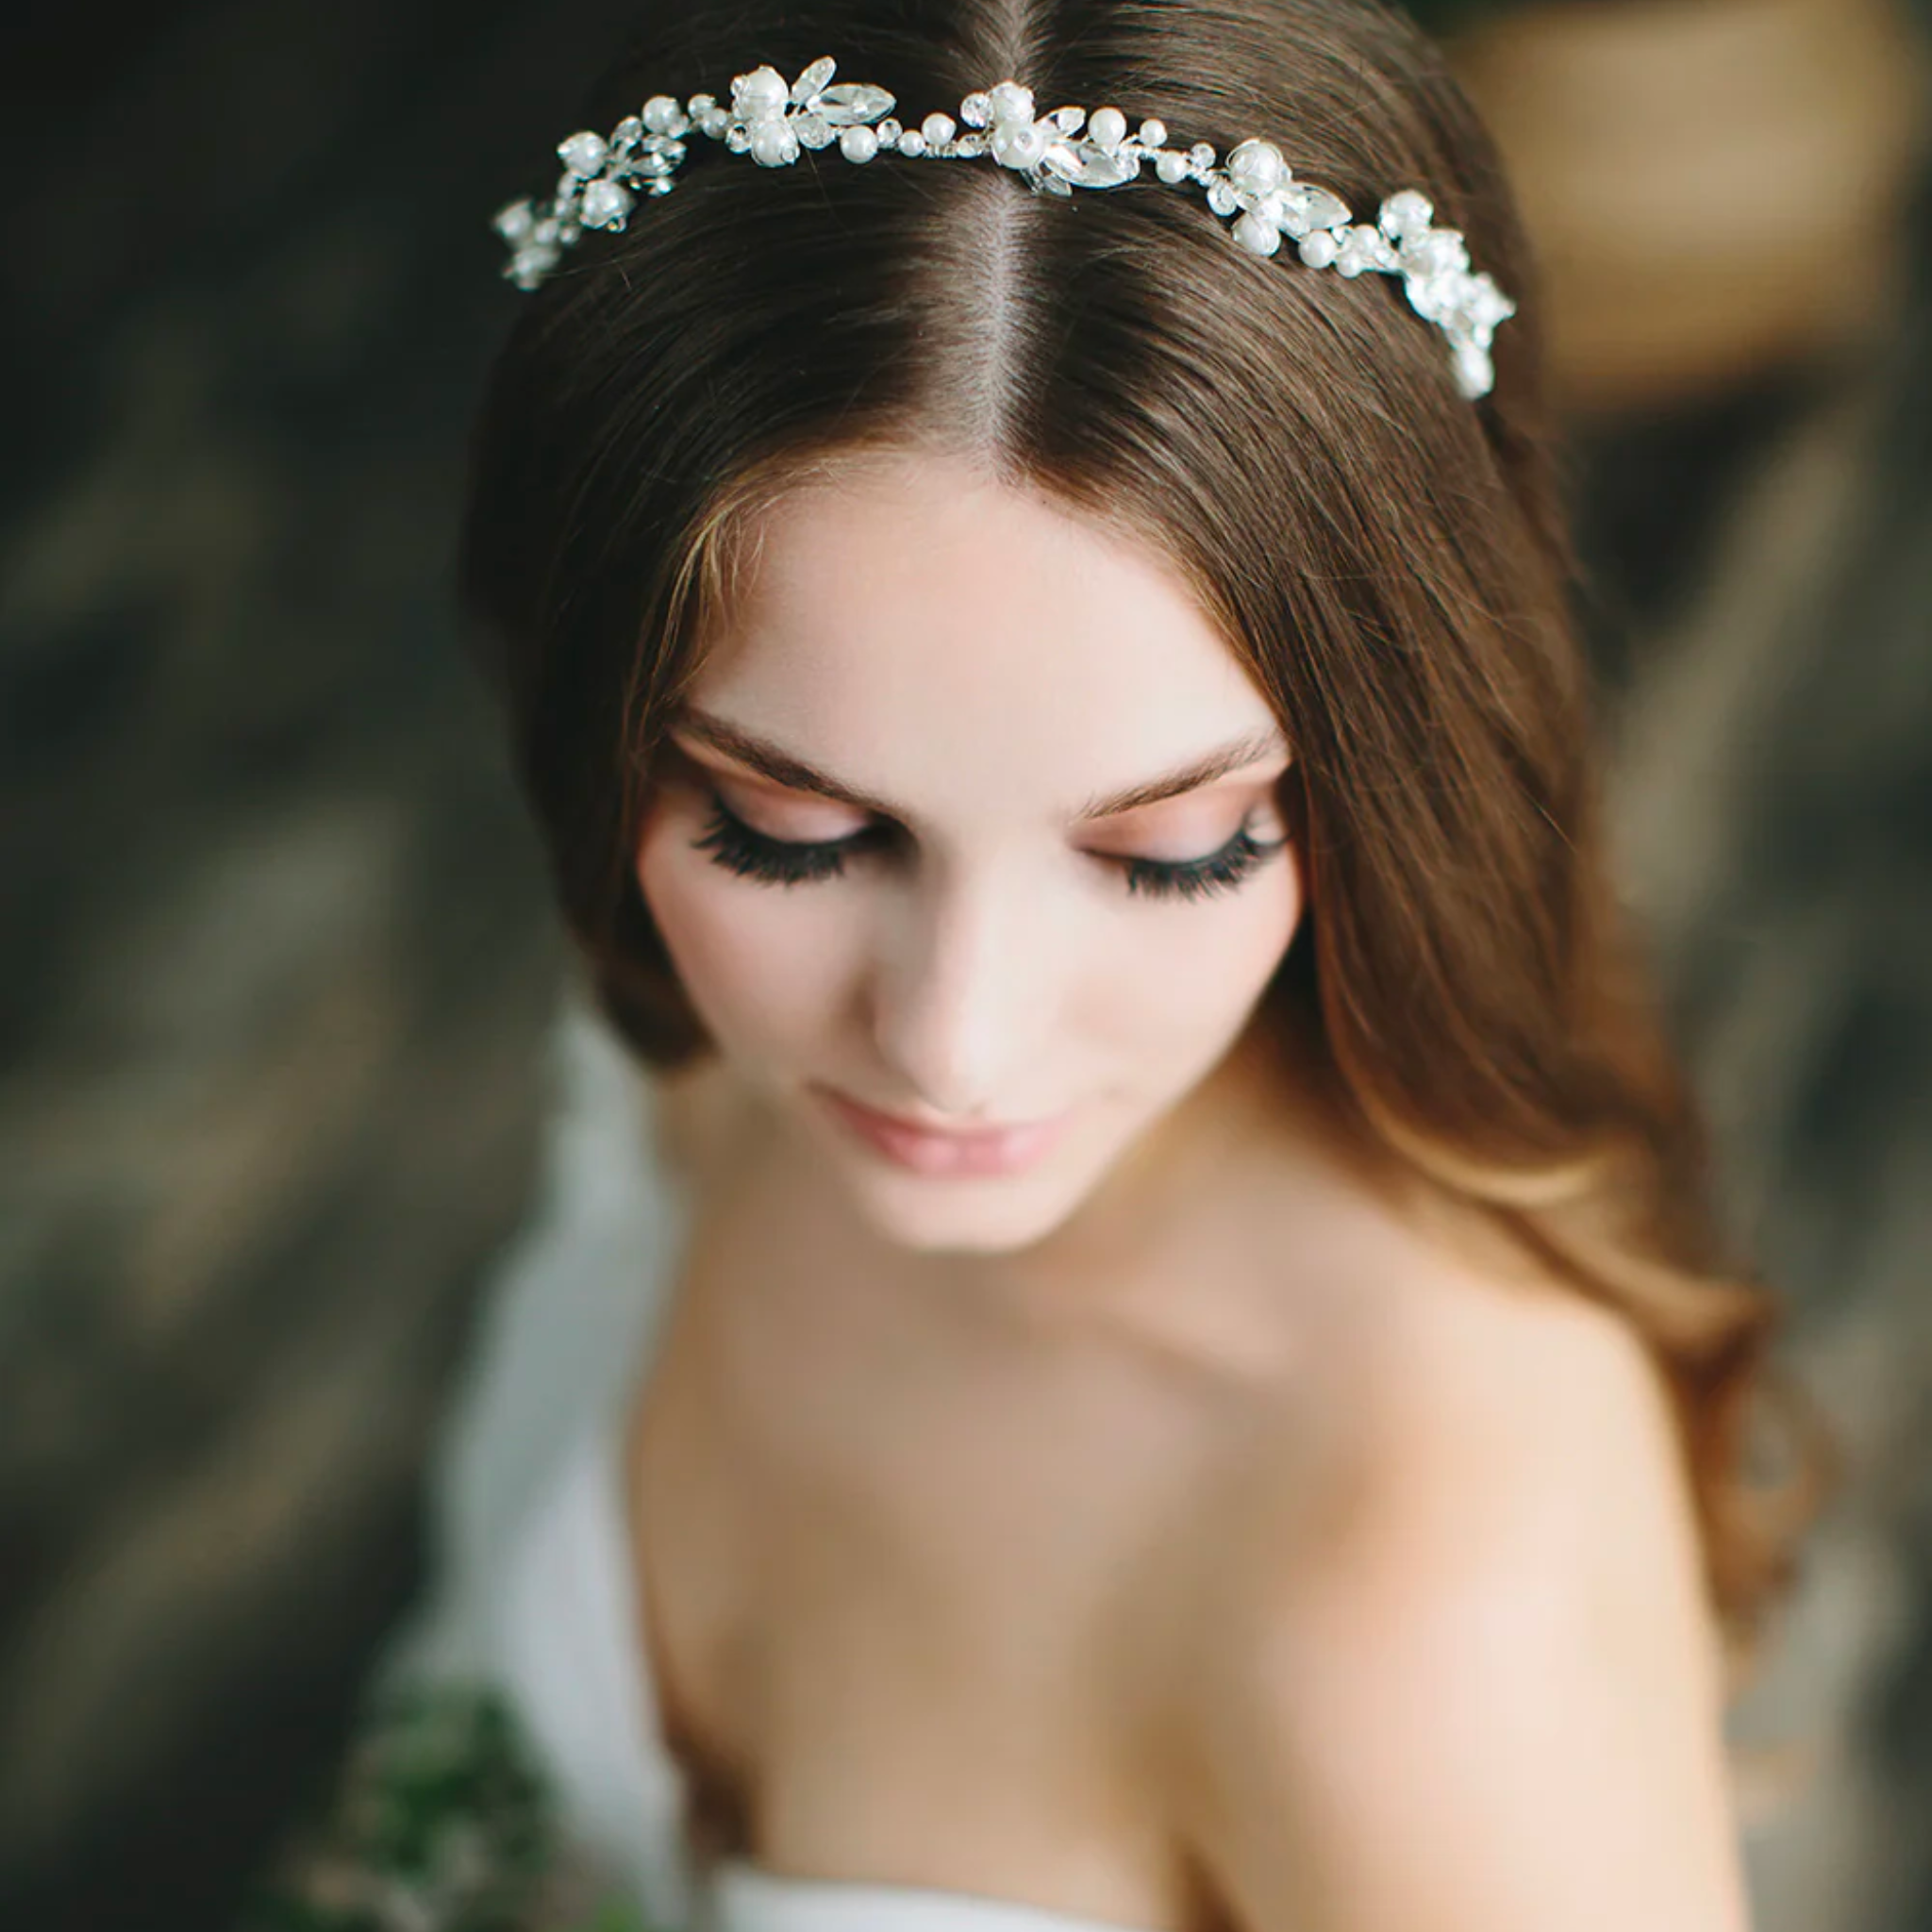 Pearl Floral Headband for Bride on Wedding